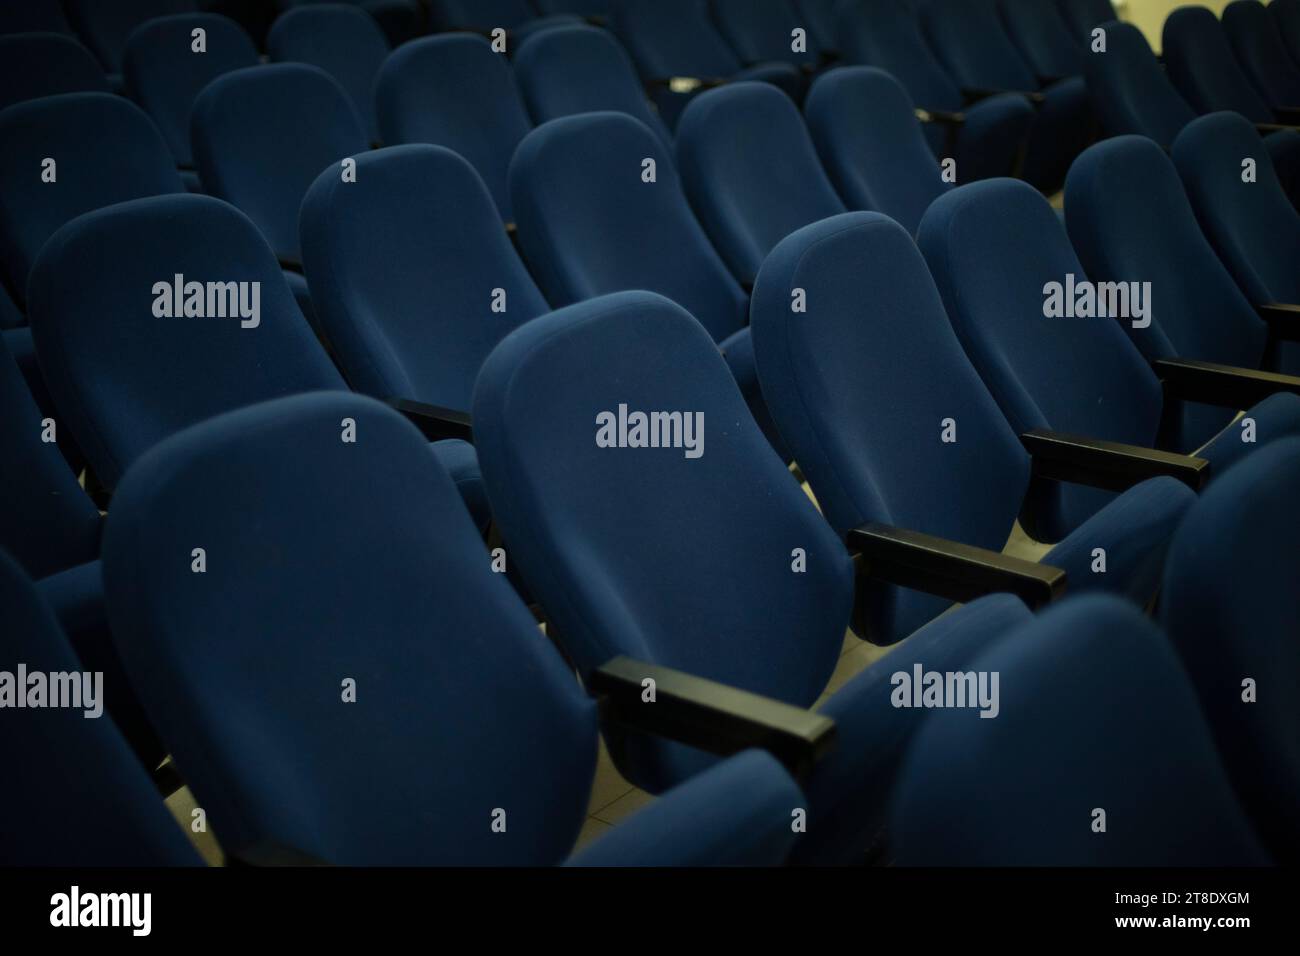 Blue seats in hall. Rows of seats. Cinema Details. Stock Photo